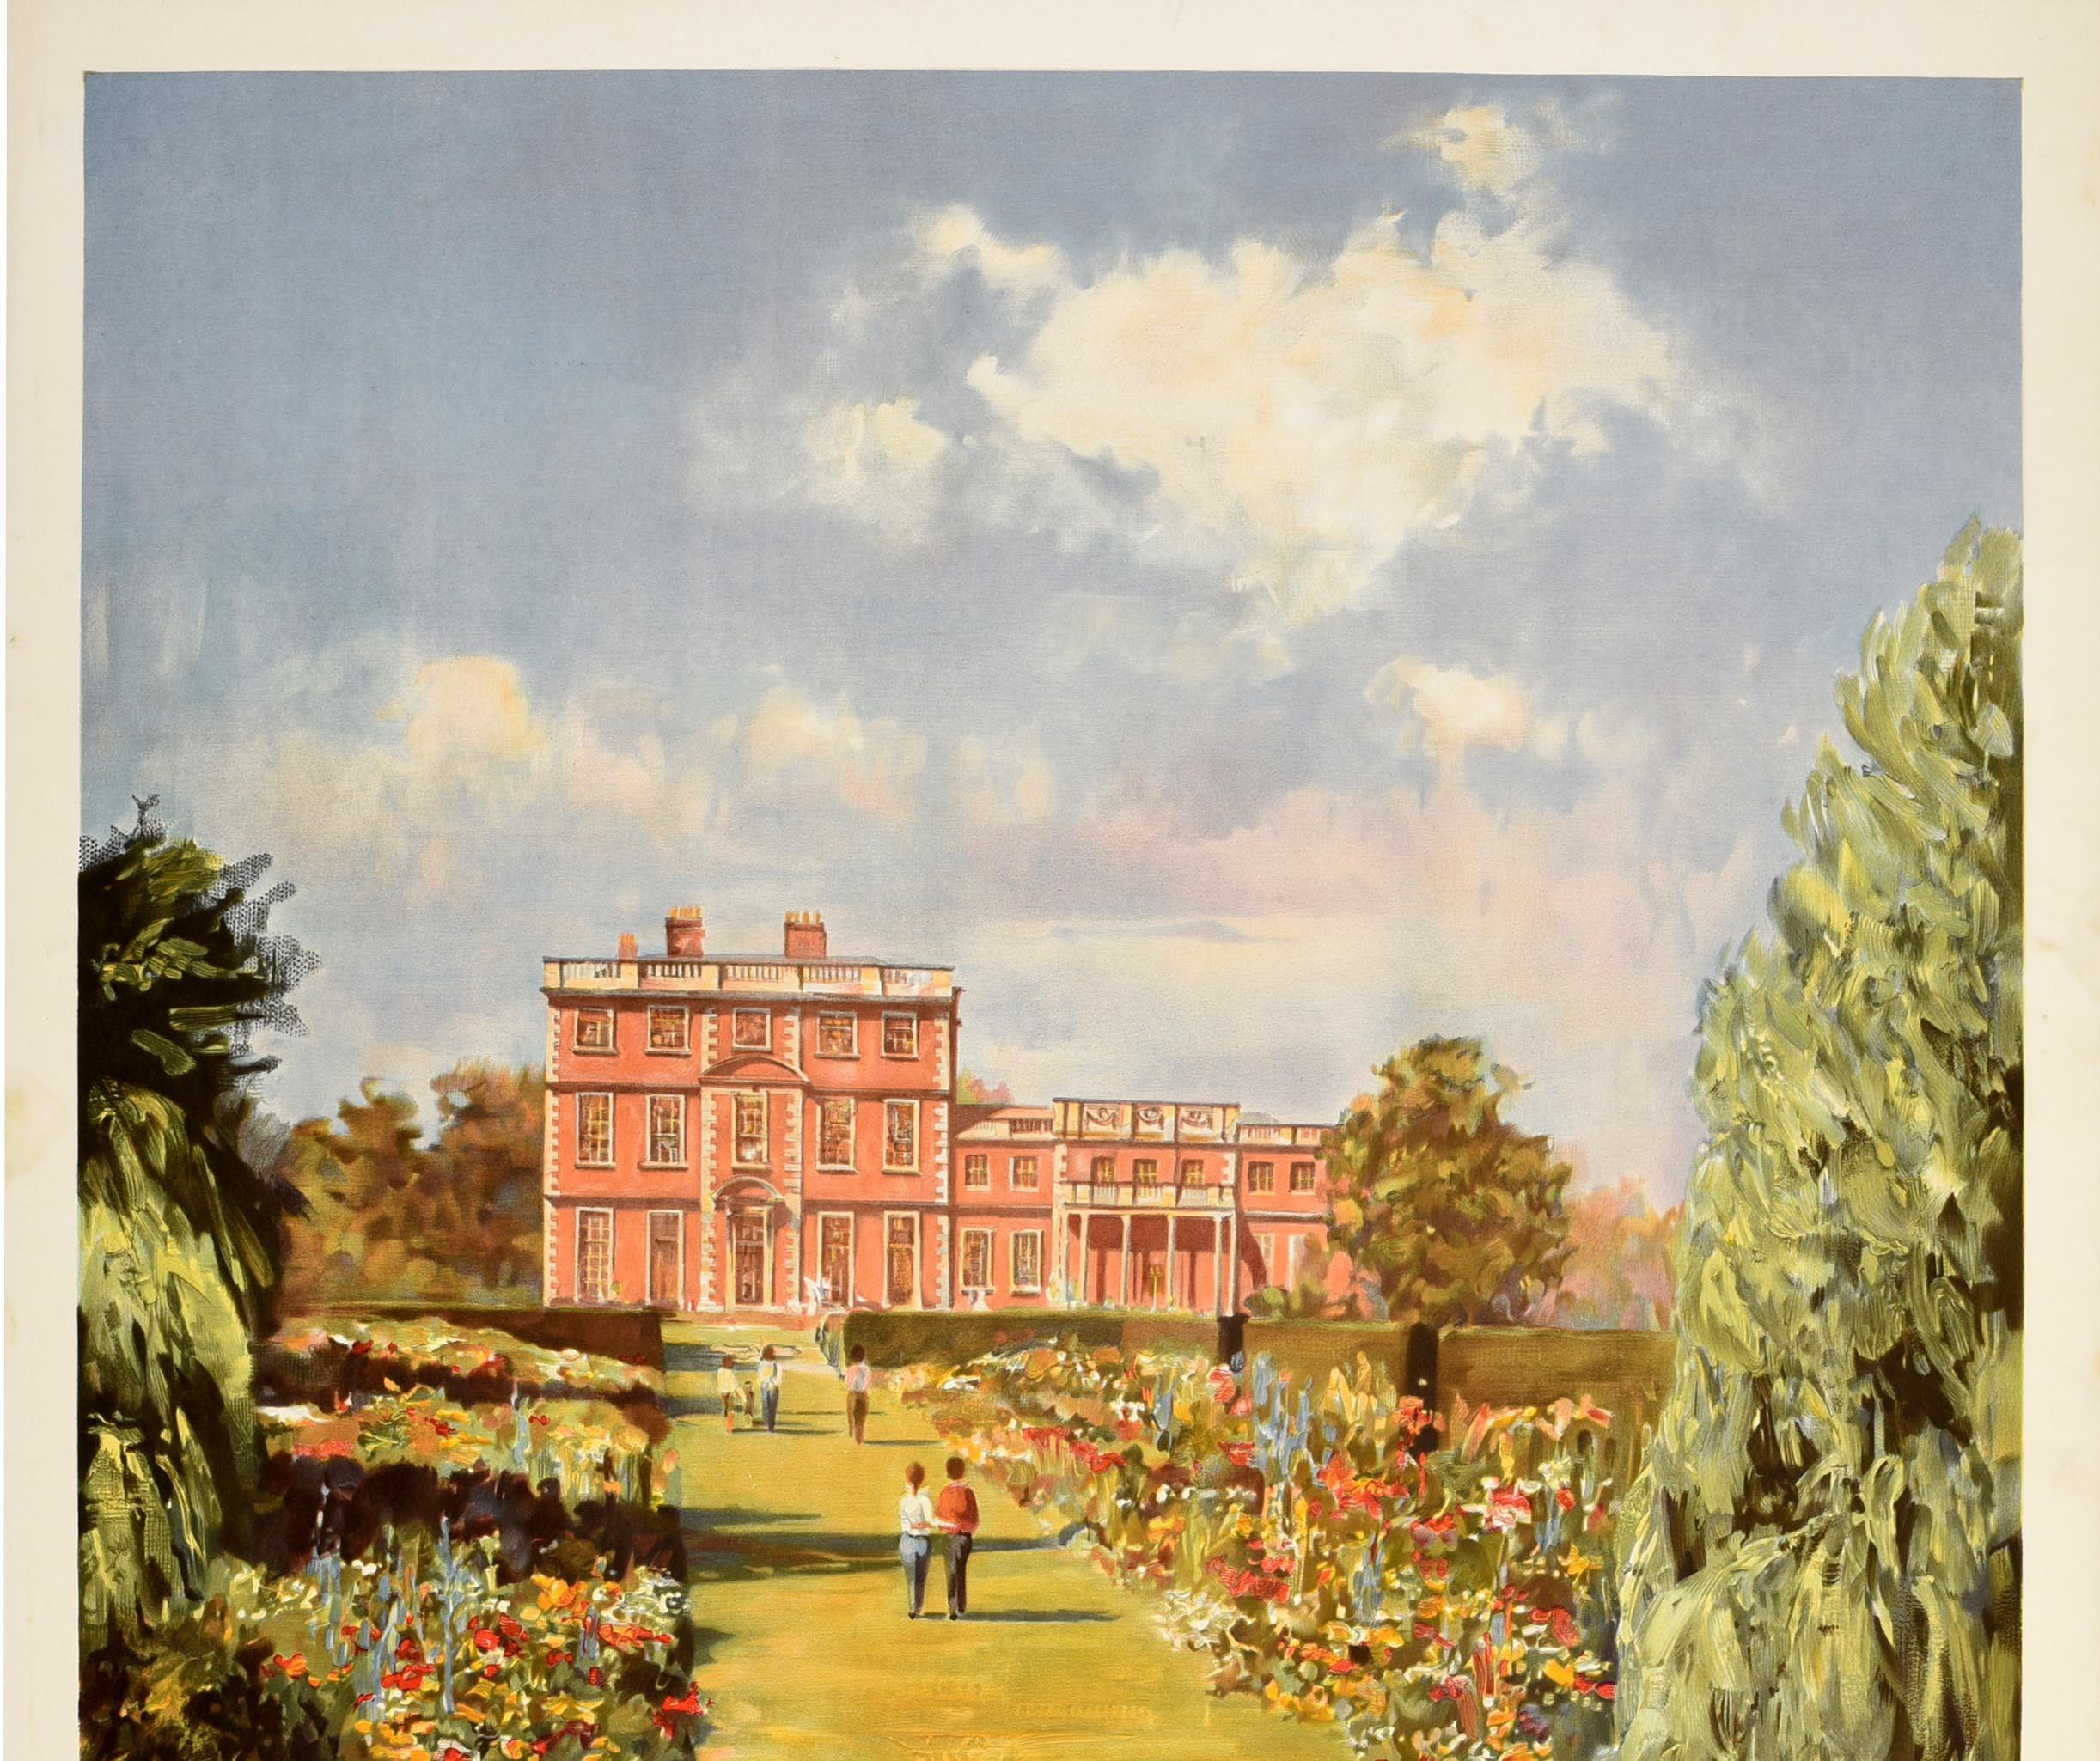 Original vintage travel poster issued by British Railways - England's Stately Homes - featuring colourful artwork of Newby Hall in Yorkshire with a view from the River Ure of people walking along the manicured garden between flower beds towards the